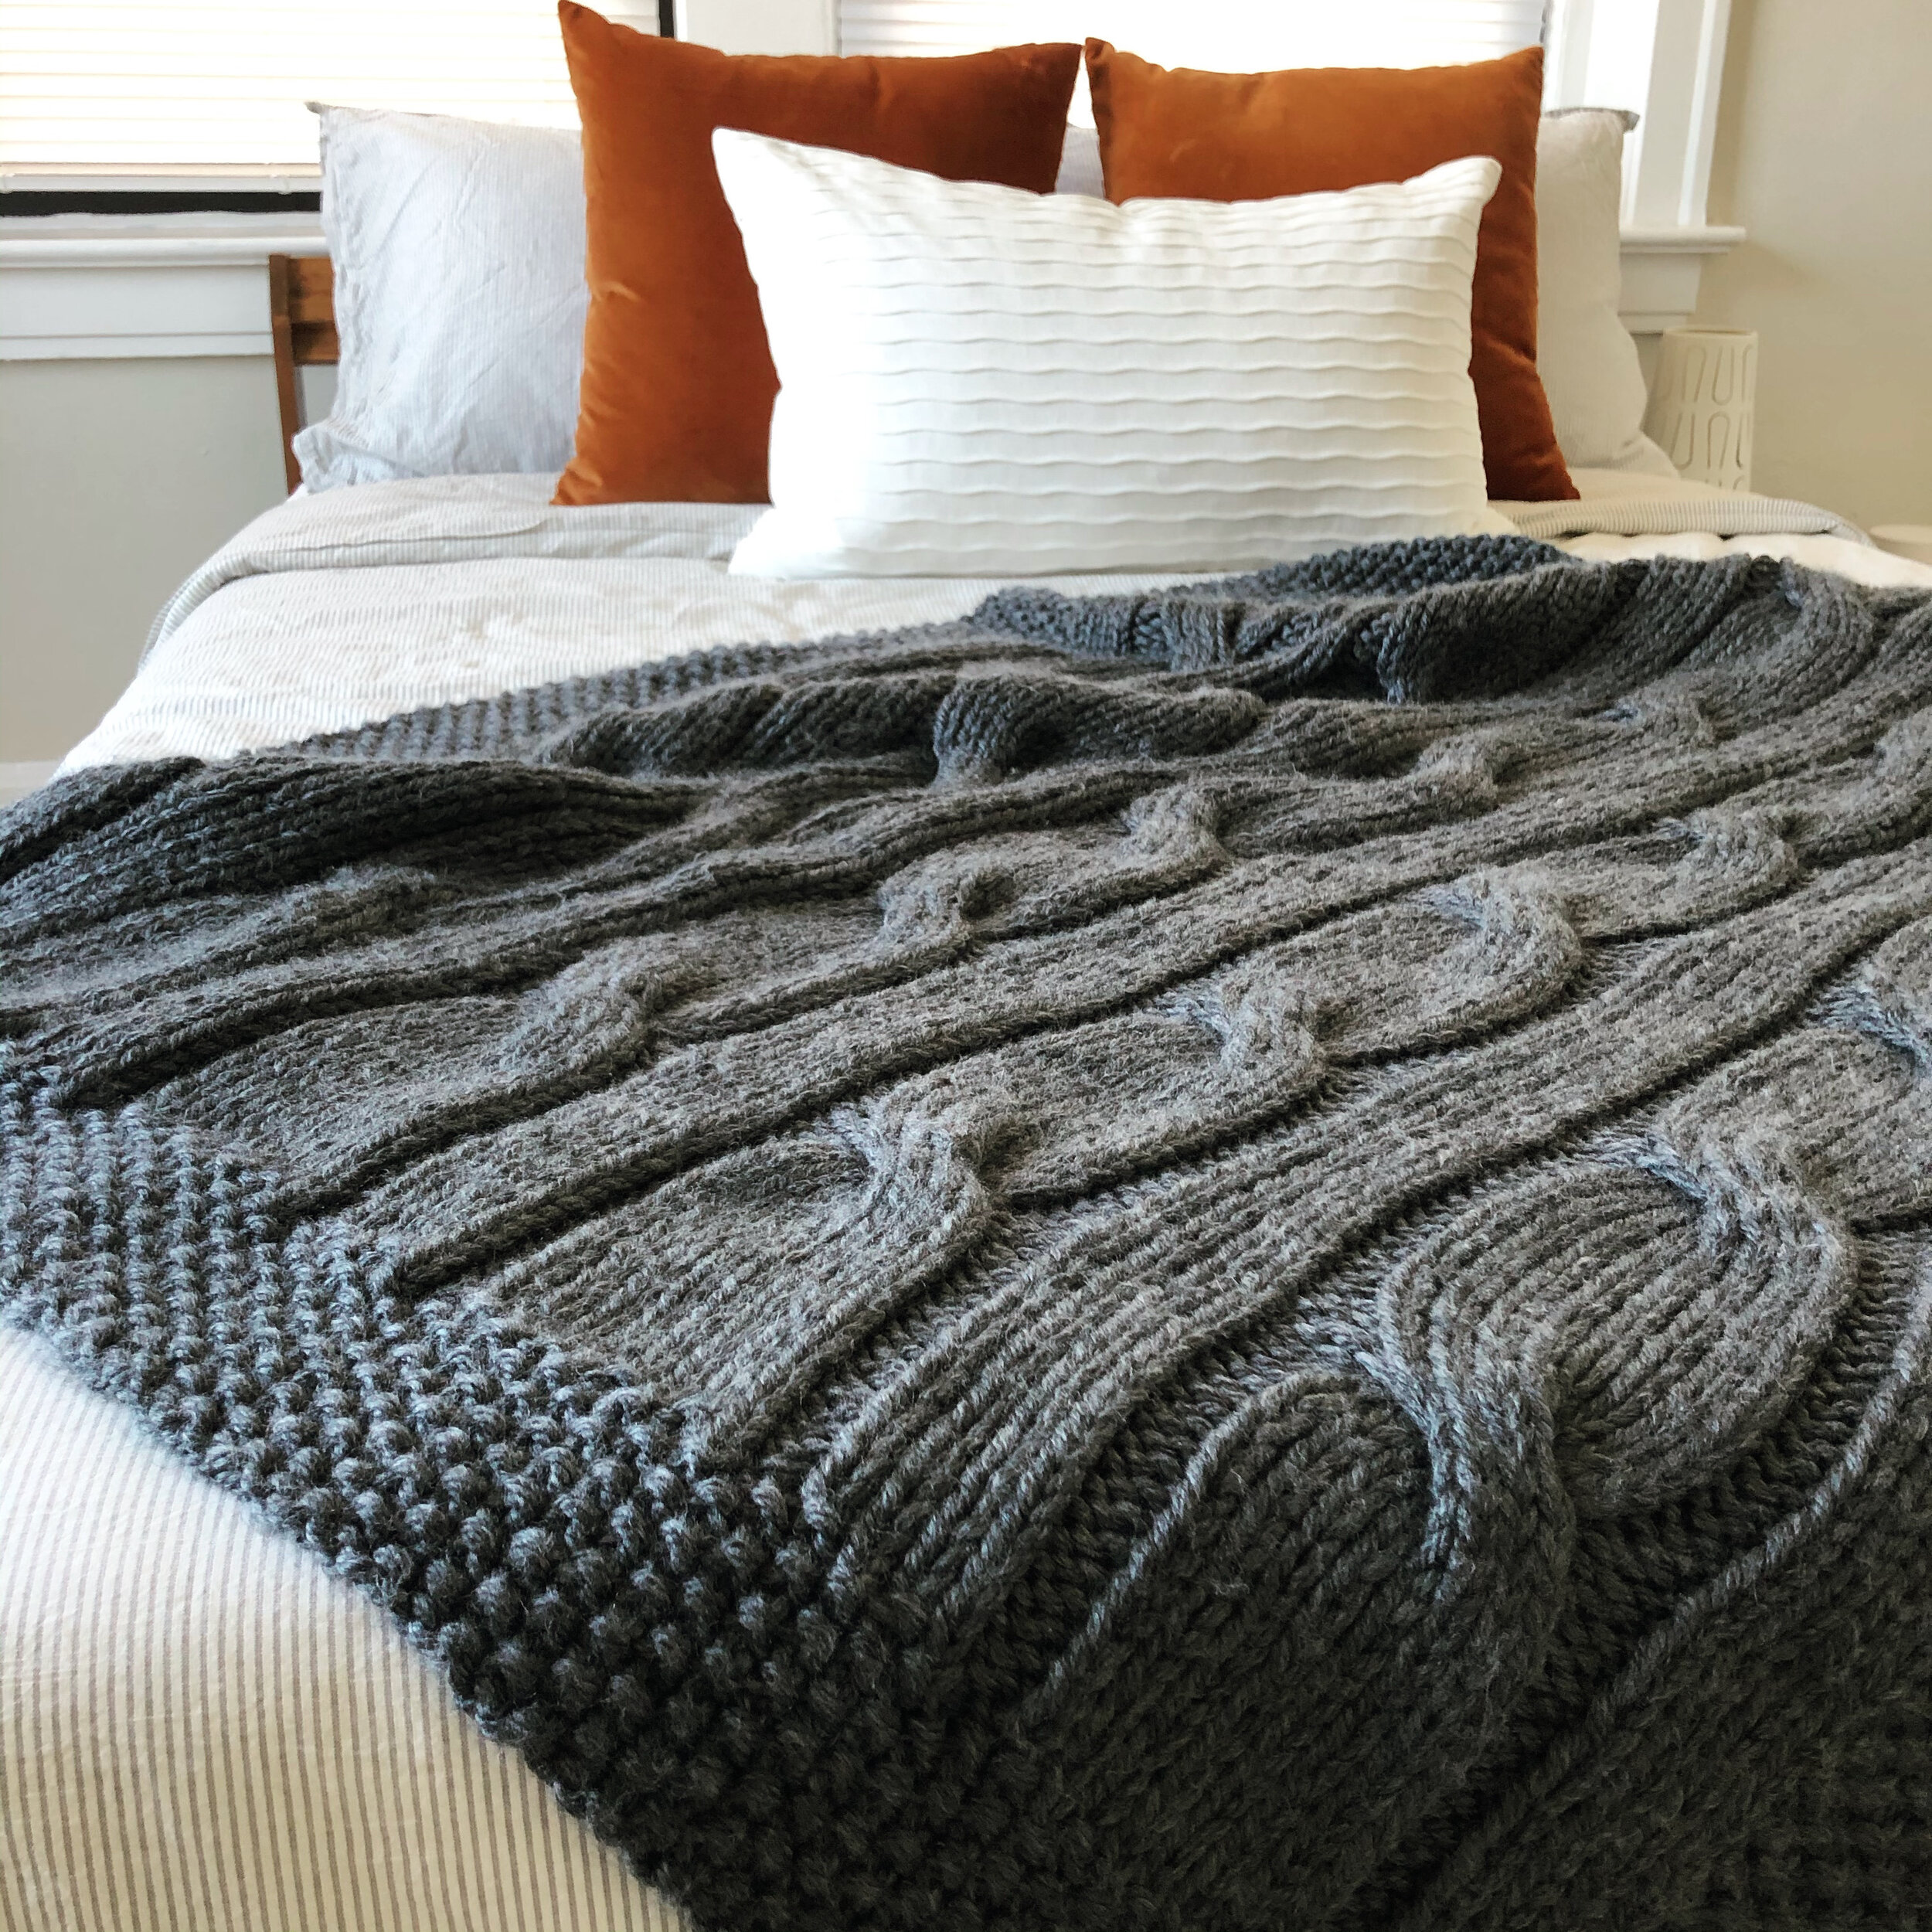 Cable Blanket Knitting Pattern for Super Bulky Yarn - North of the River  Afghan Throw — Fifty Four Ten Studio